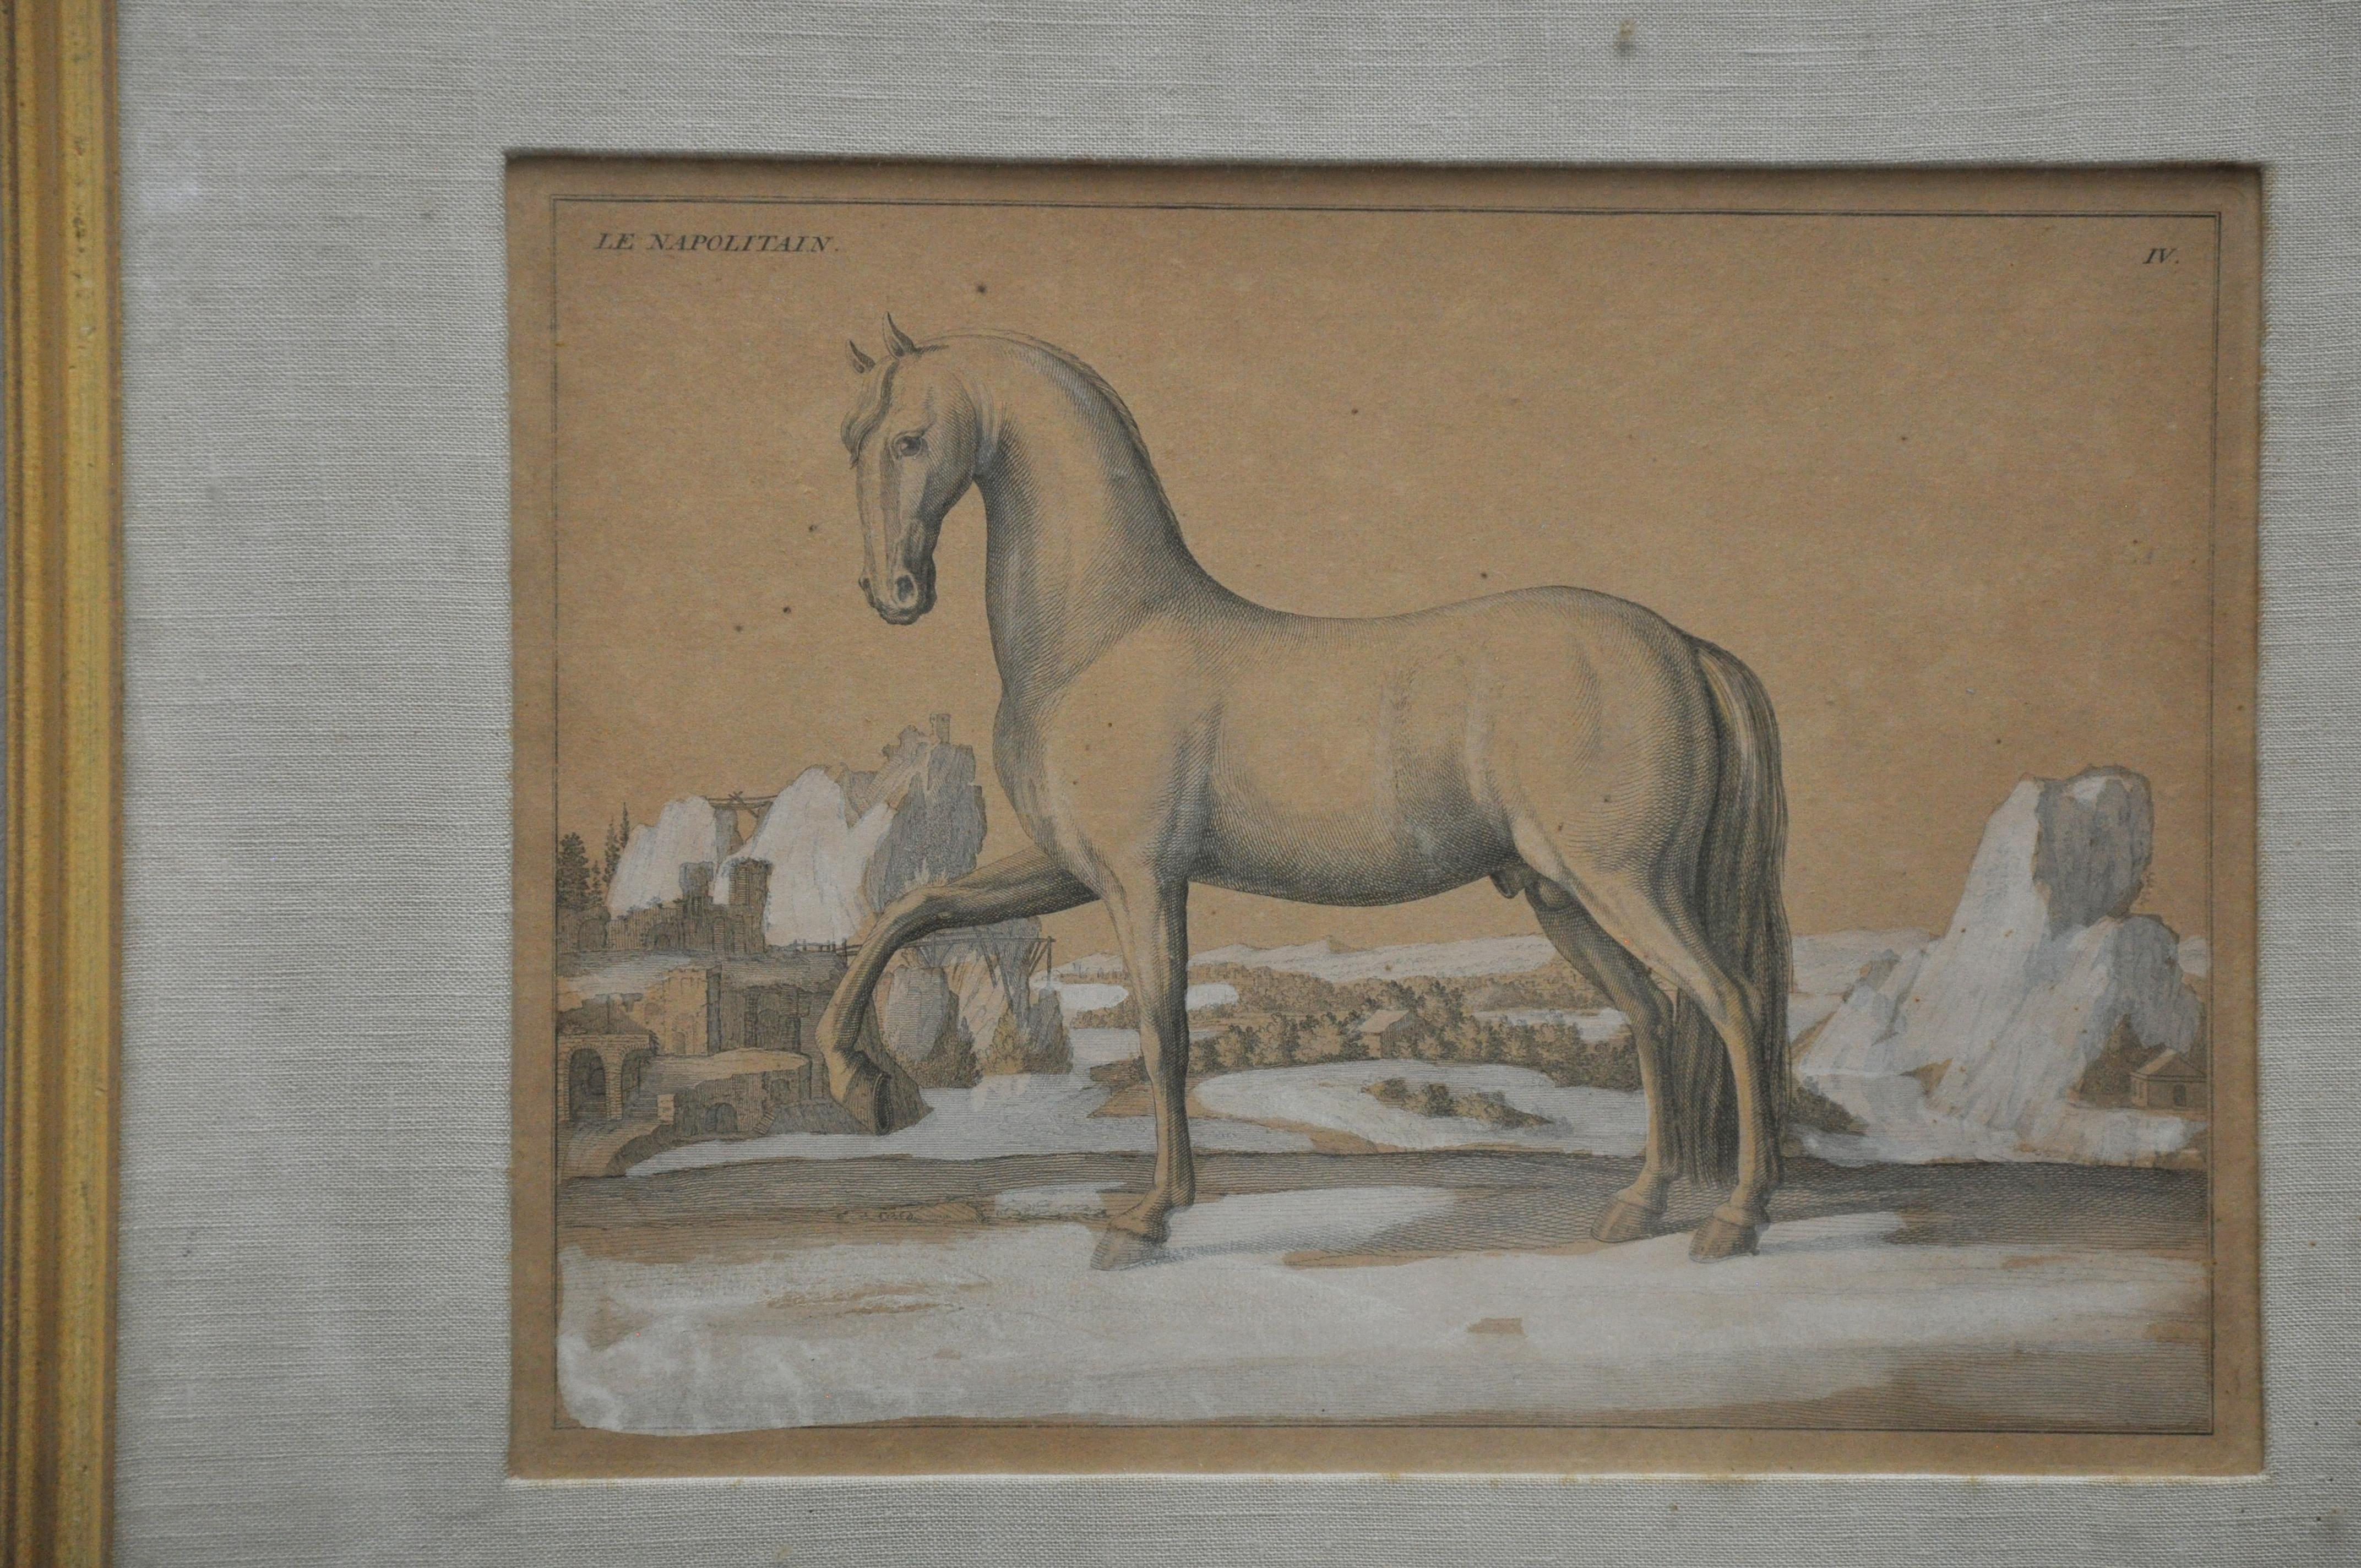 18th Century Etchings of Le Neopoltain and Cheval Anglois Horses - Set of 2 In Good Condition For Sale In Geneva, IL